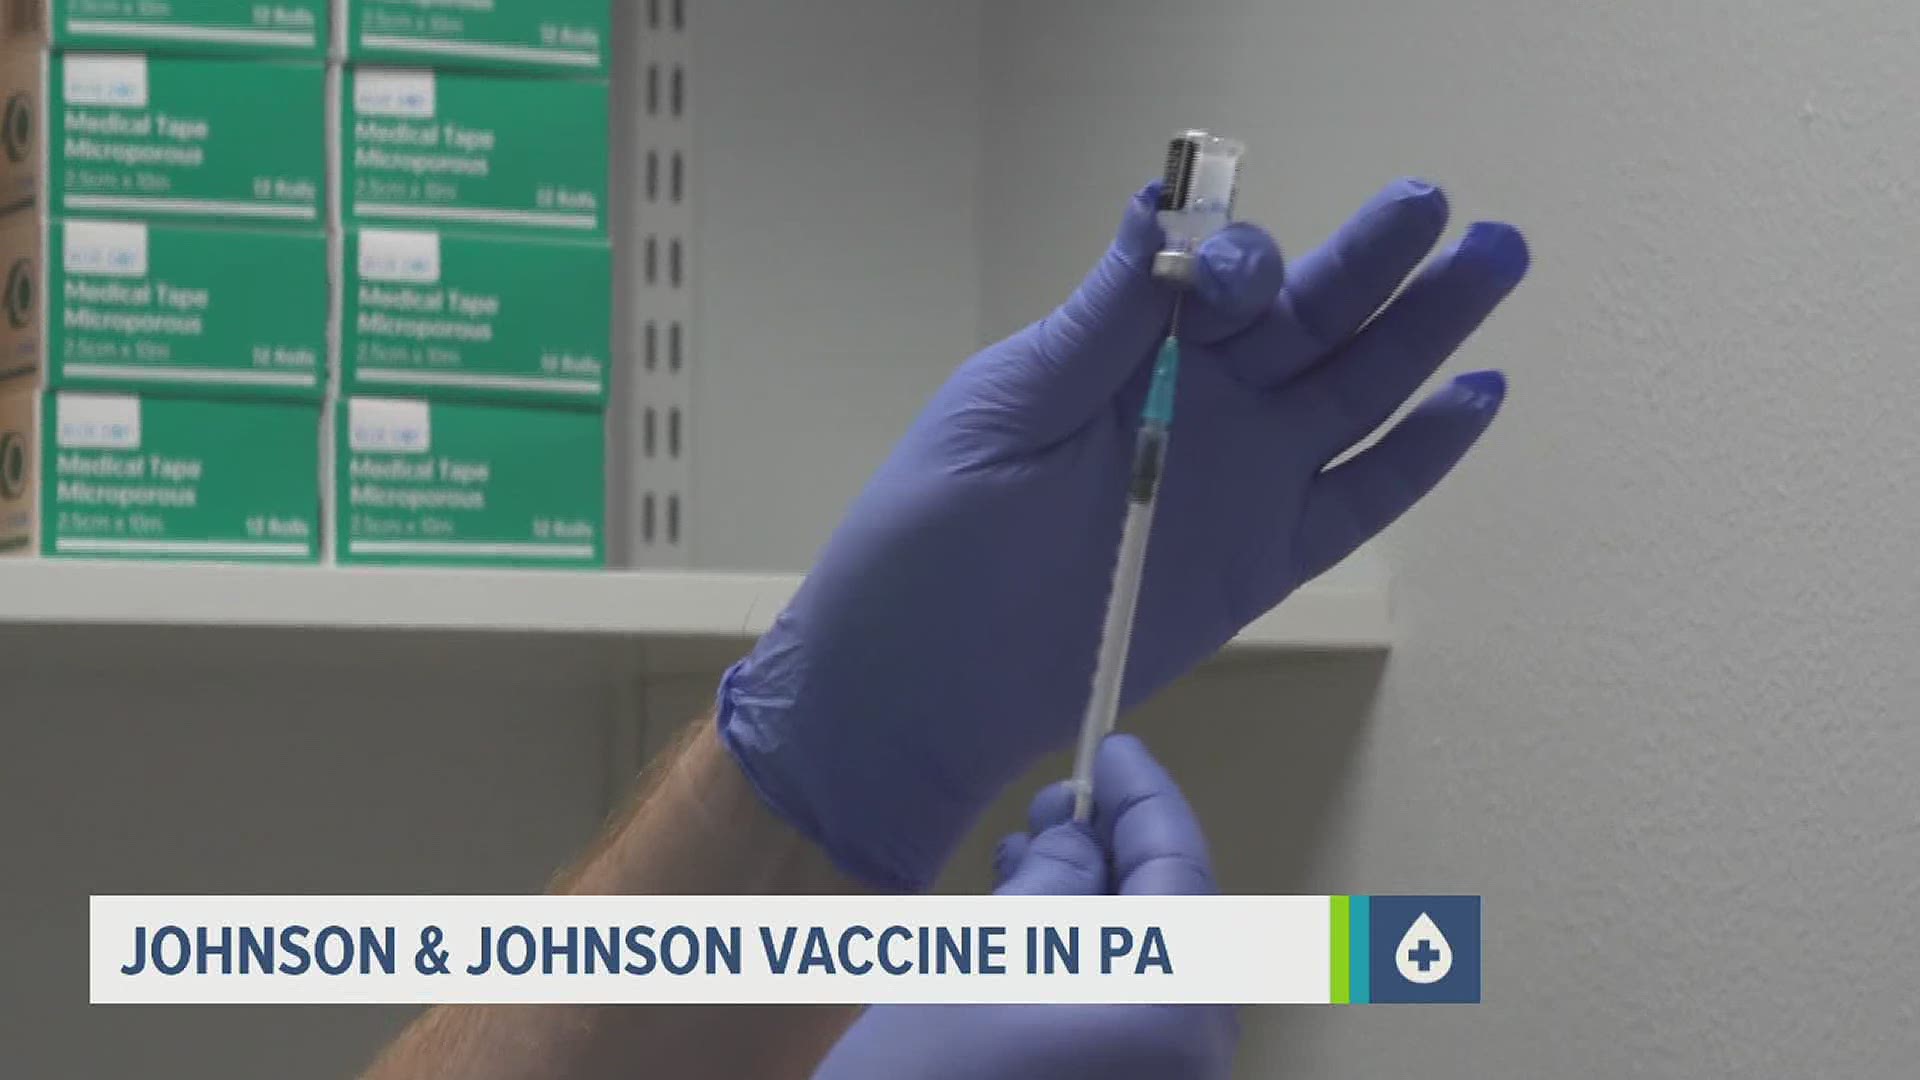 Easier transport makes the Johnson & Johnson vaccine idea for remote and mobile vaccination sites across Pennsylvania.